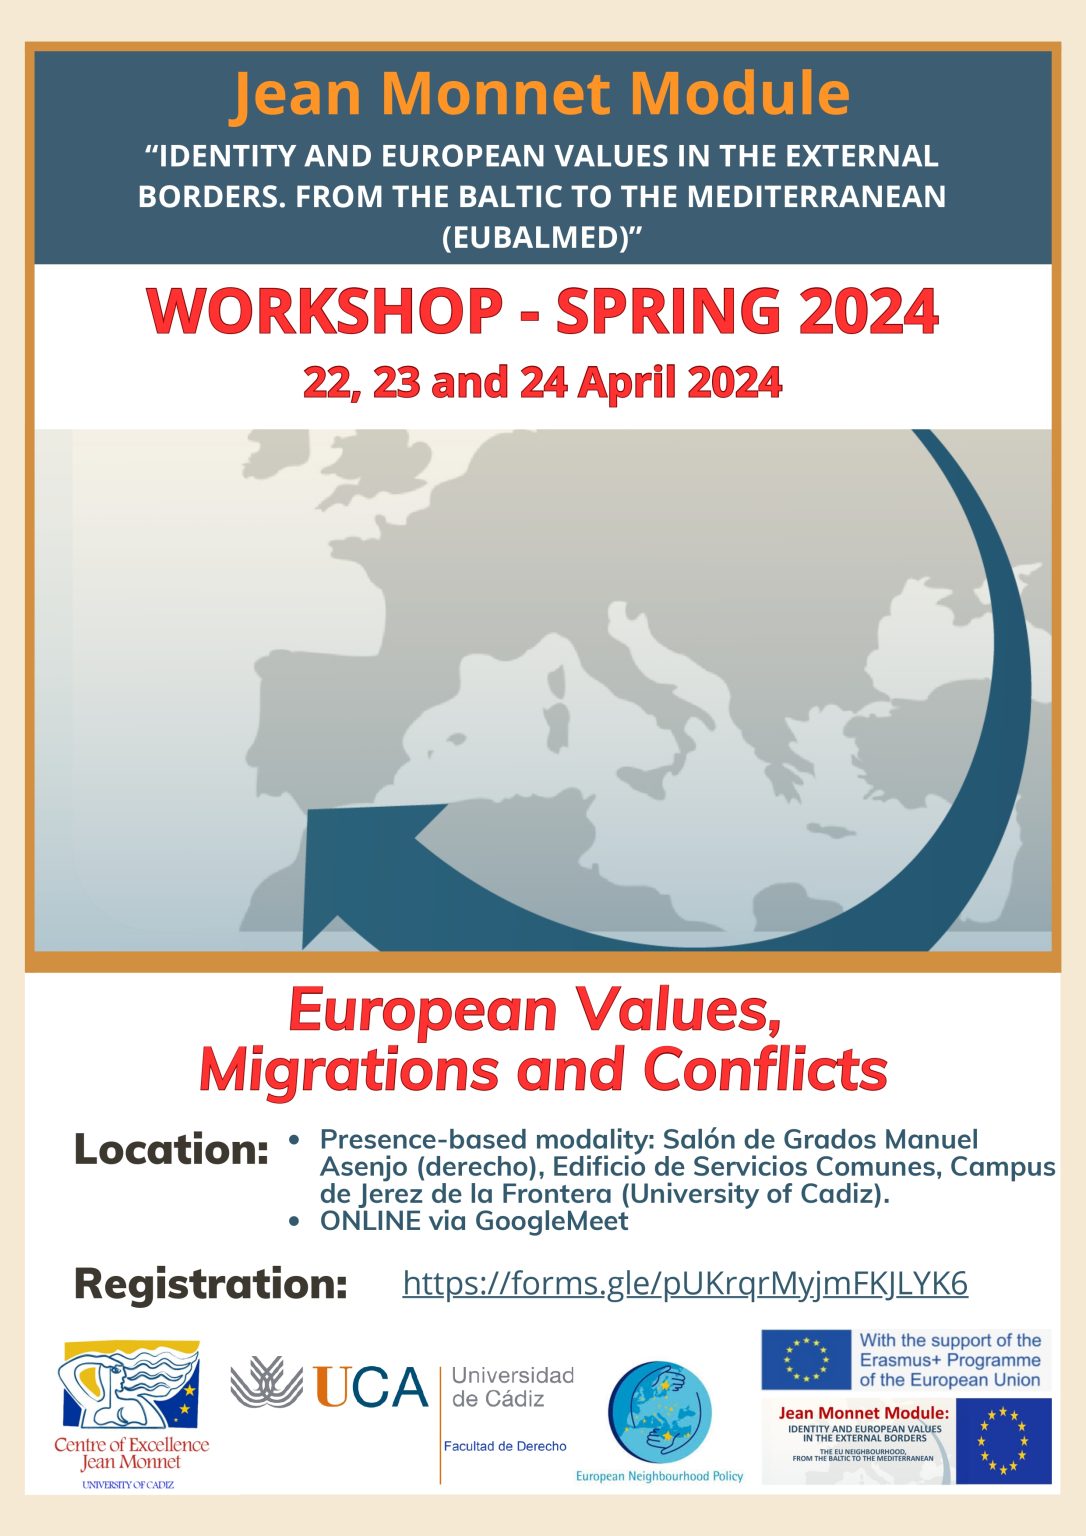 WORKSHOP: EUROPEAN VALUES, MIGRATIONS AND CONFLICTS– JEAN MONNET MODULE “IDENTITY AND EUROPEAN VA...